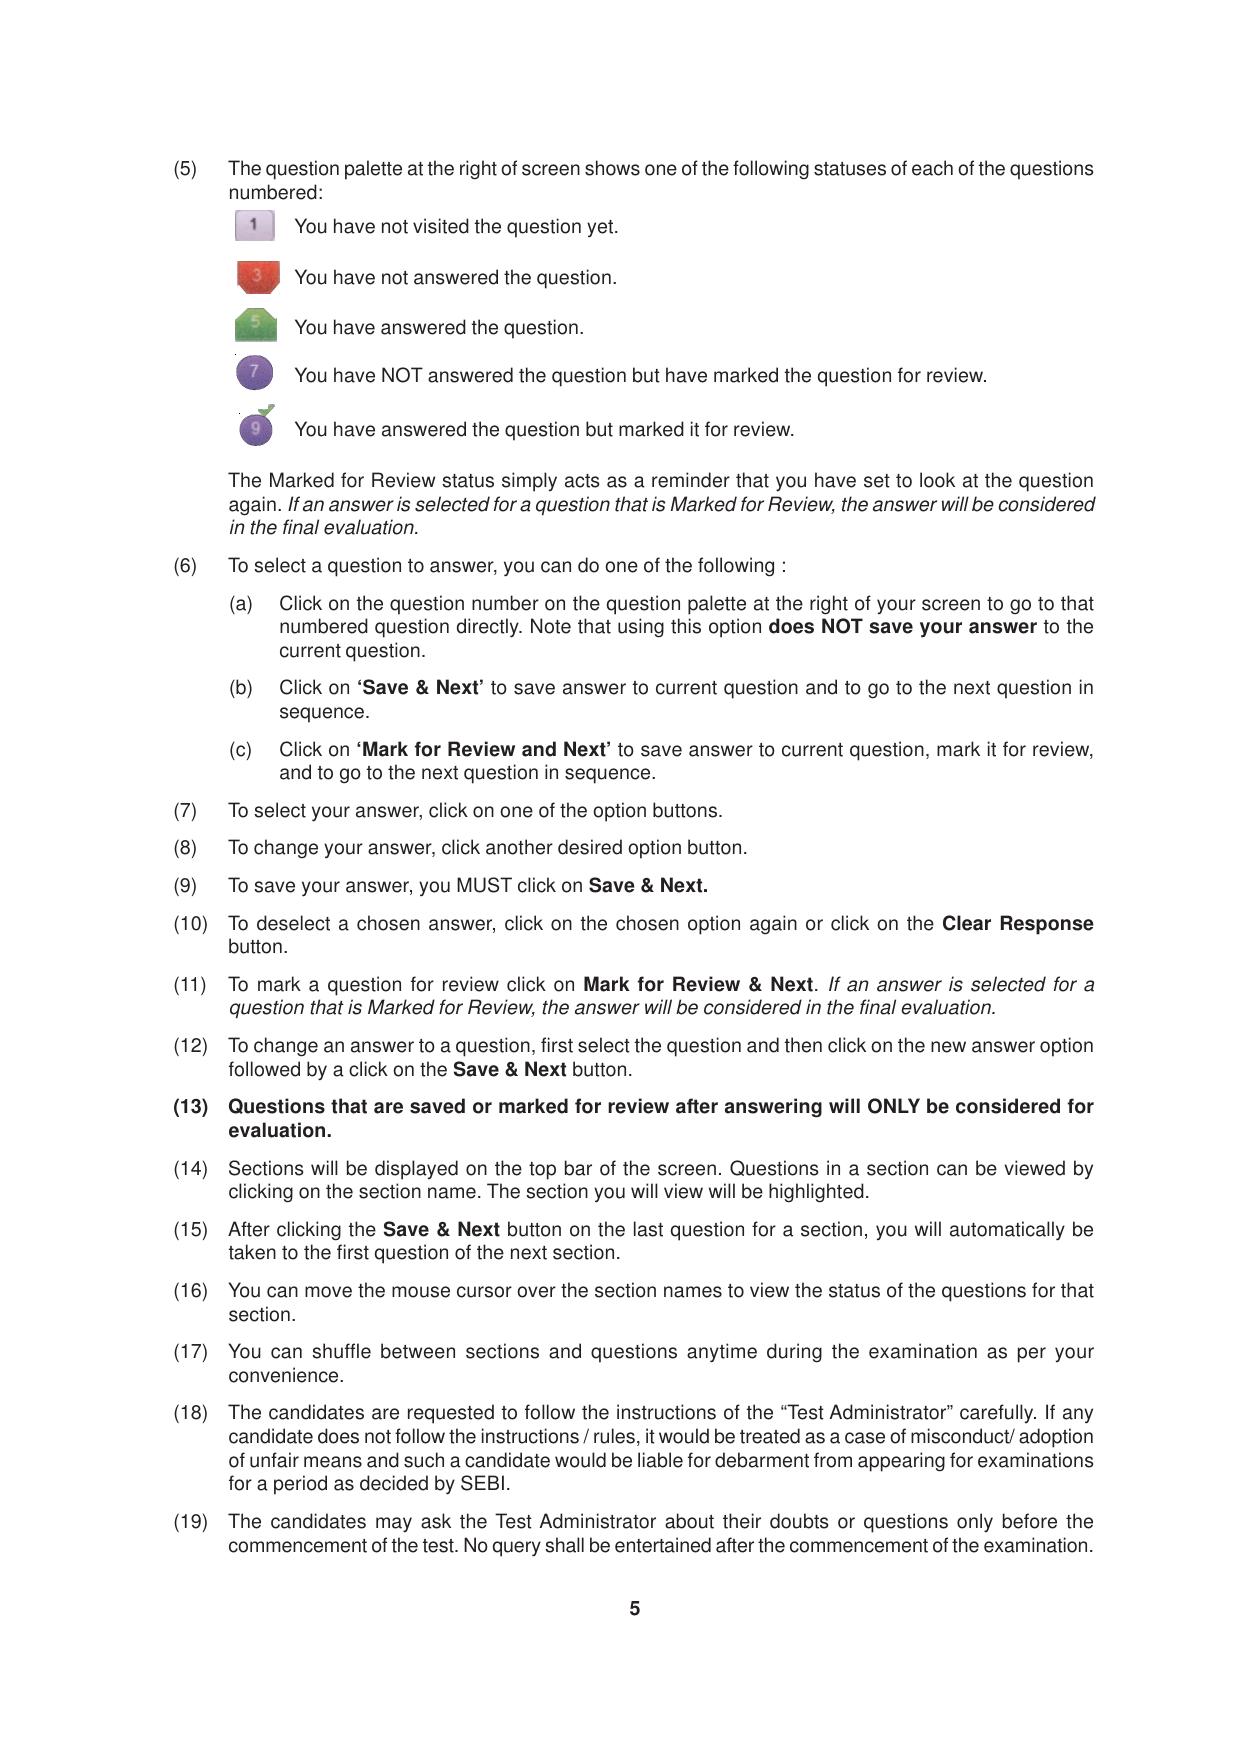 SEBI Officer Sample Question Paper Part 1 - Page 5